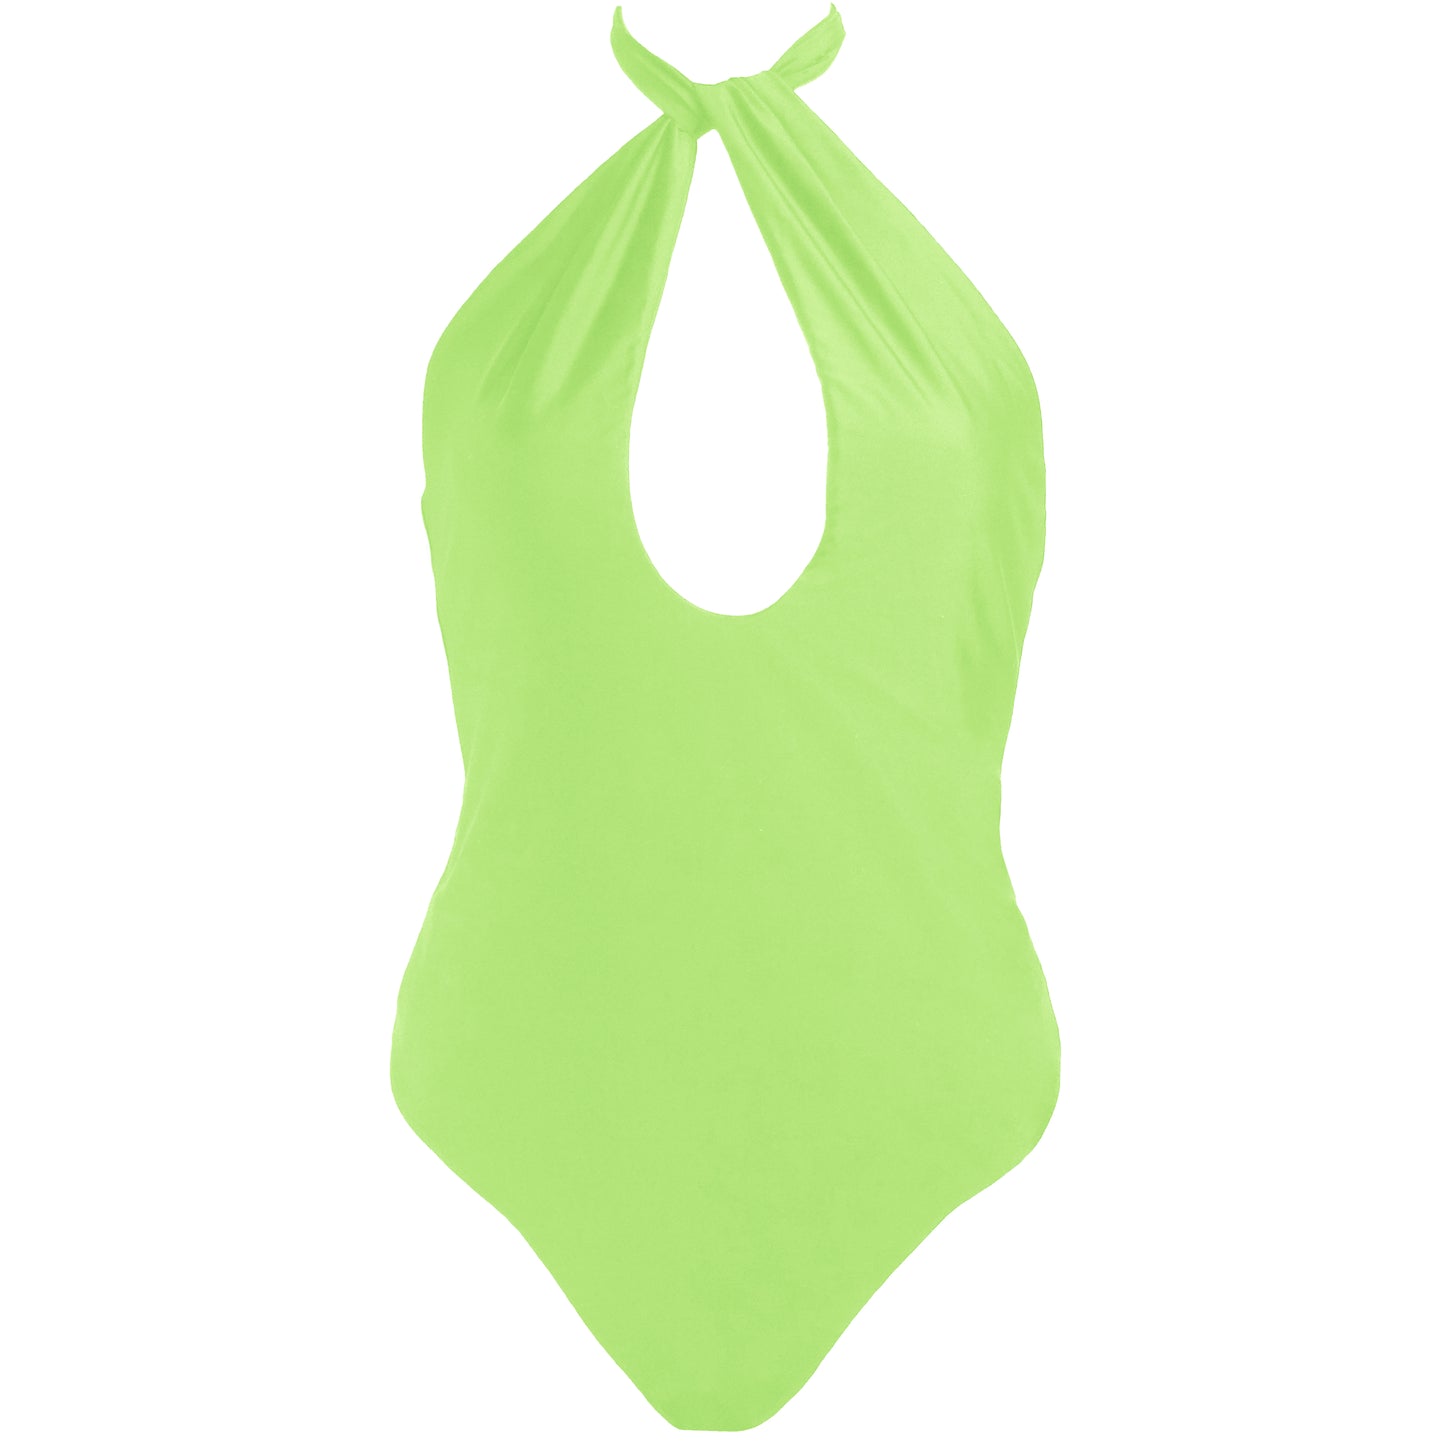 Light neon green elevated halter one piece swimsuit with versatile cross front tie neck straps, keyhole neckline, high cut legs and full coverage.